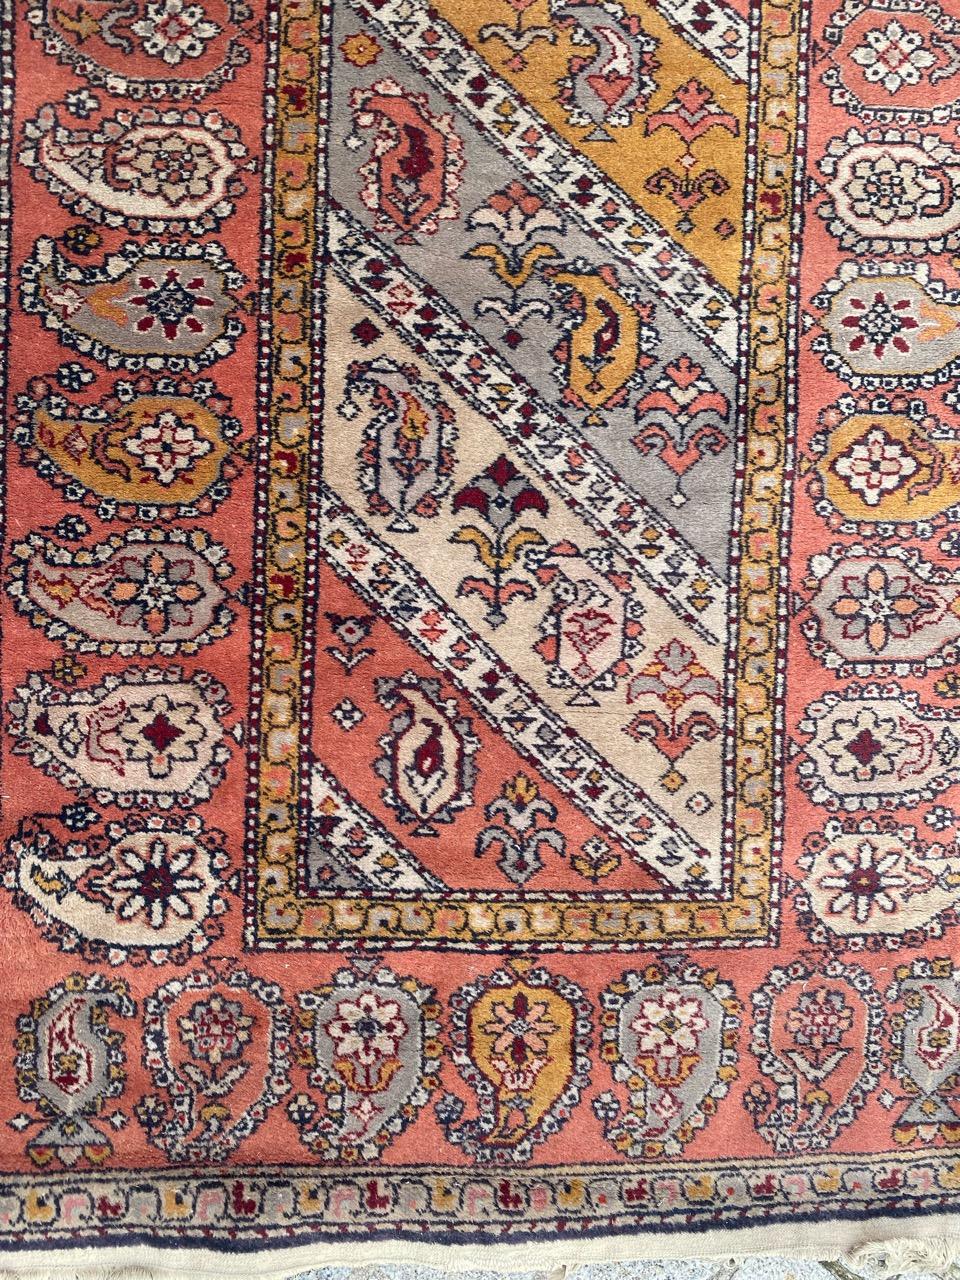 Beautiful mid century Sinkiang runner with nice Caucasian shirwan design and nice colors, entirely hand knotted with wool velvet on cotton foundation.

✨✨✨
